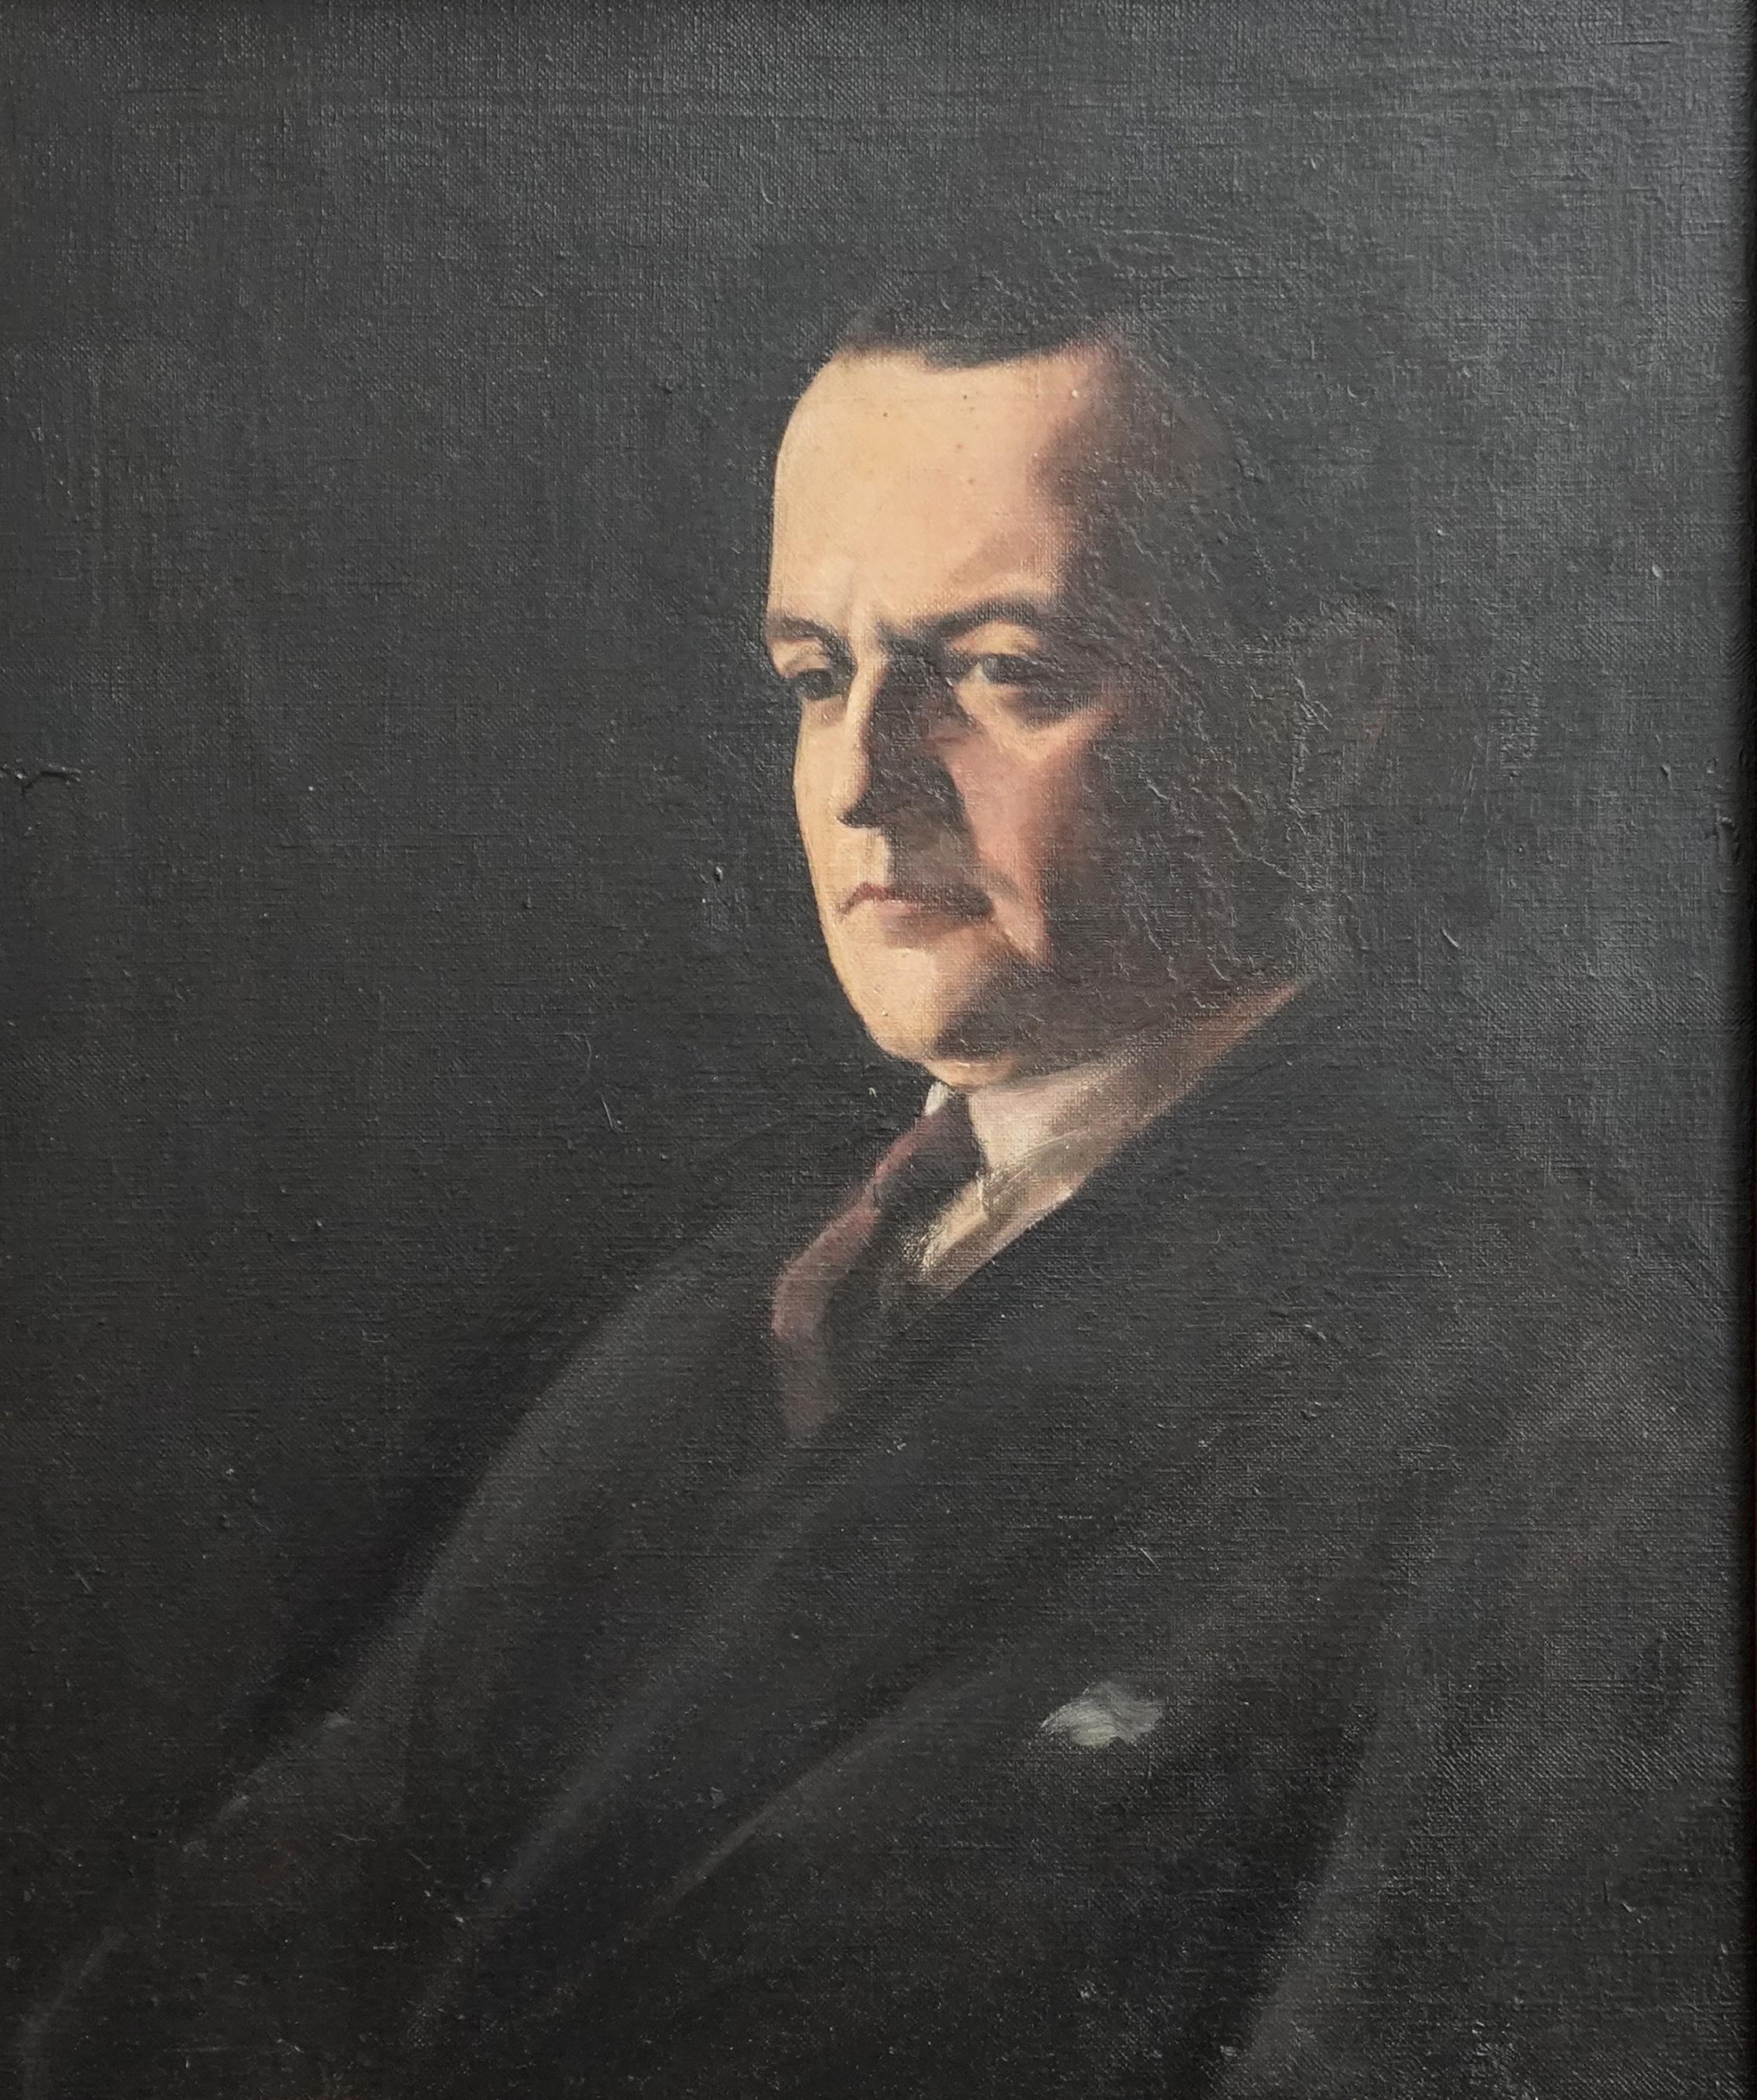 This superb portrait oil painting is by noted Russian Jewish artist Jacob Kramer. The sitter is a friend of the artist, George Hopkinson, proud Yorkshireman and textile businessman who was a director of a West Riding textile company. It is a profile